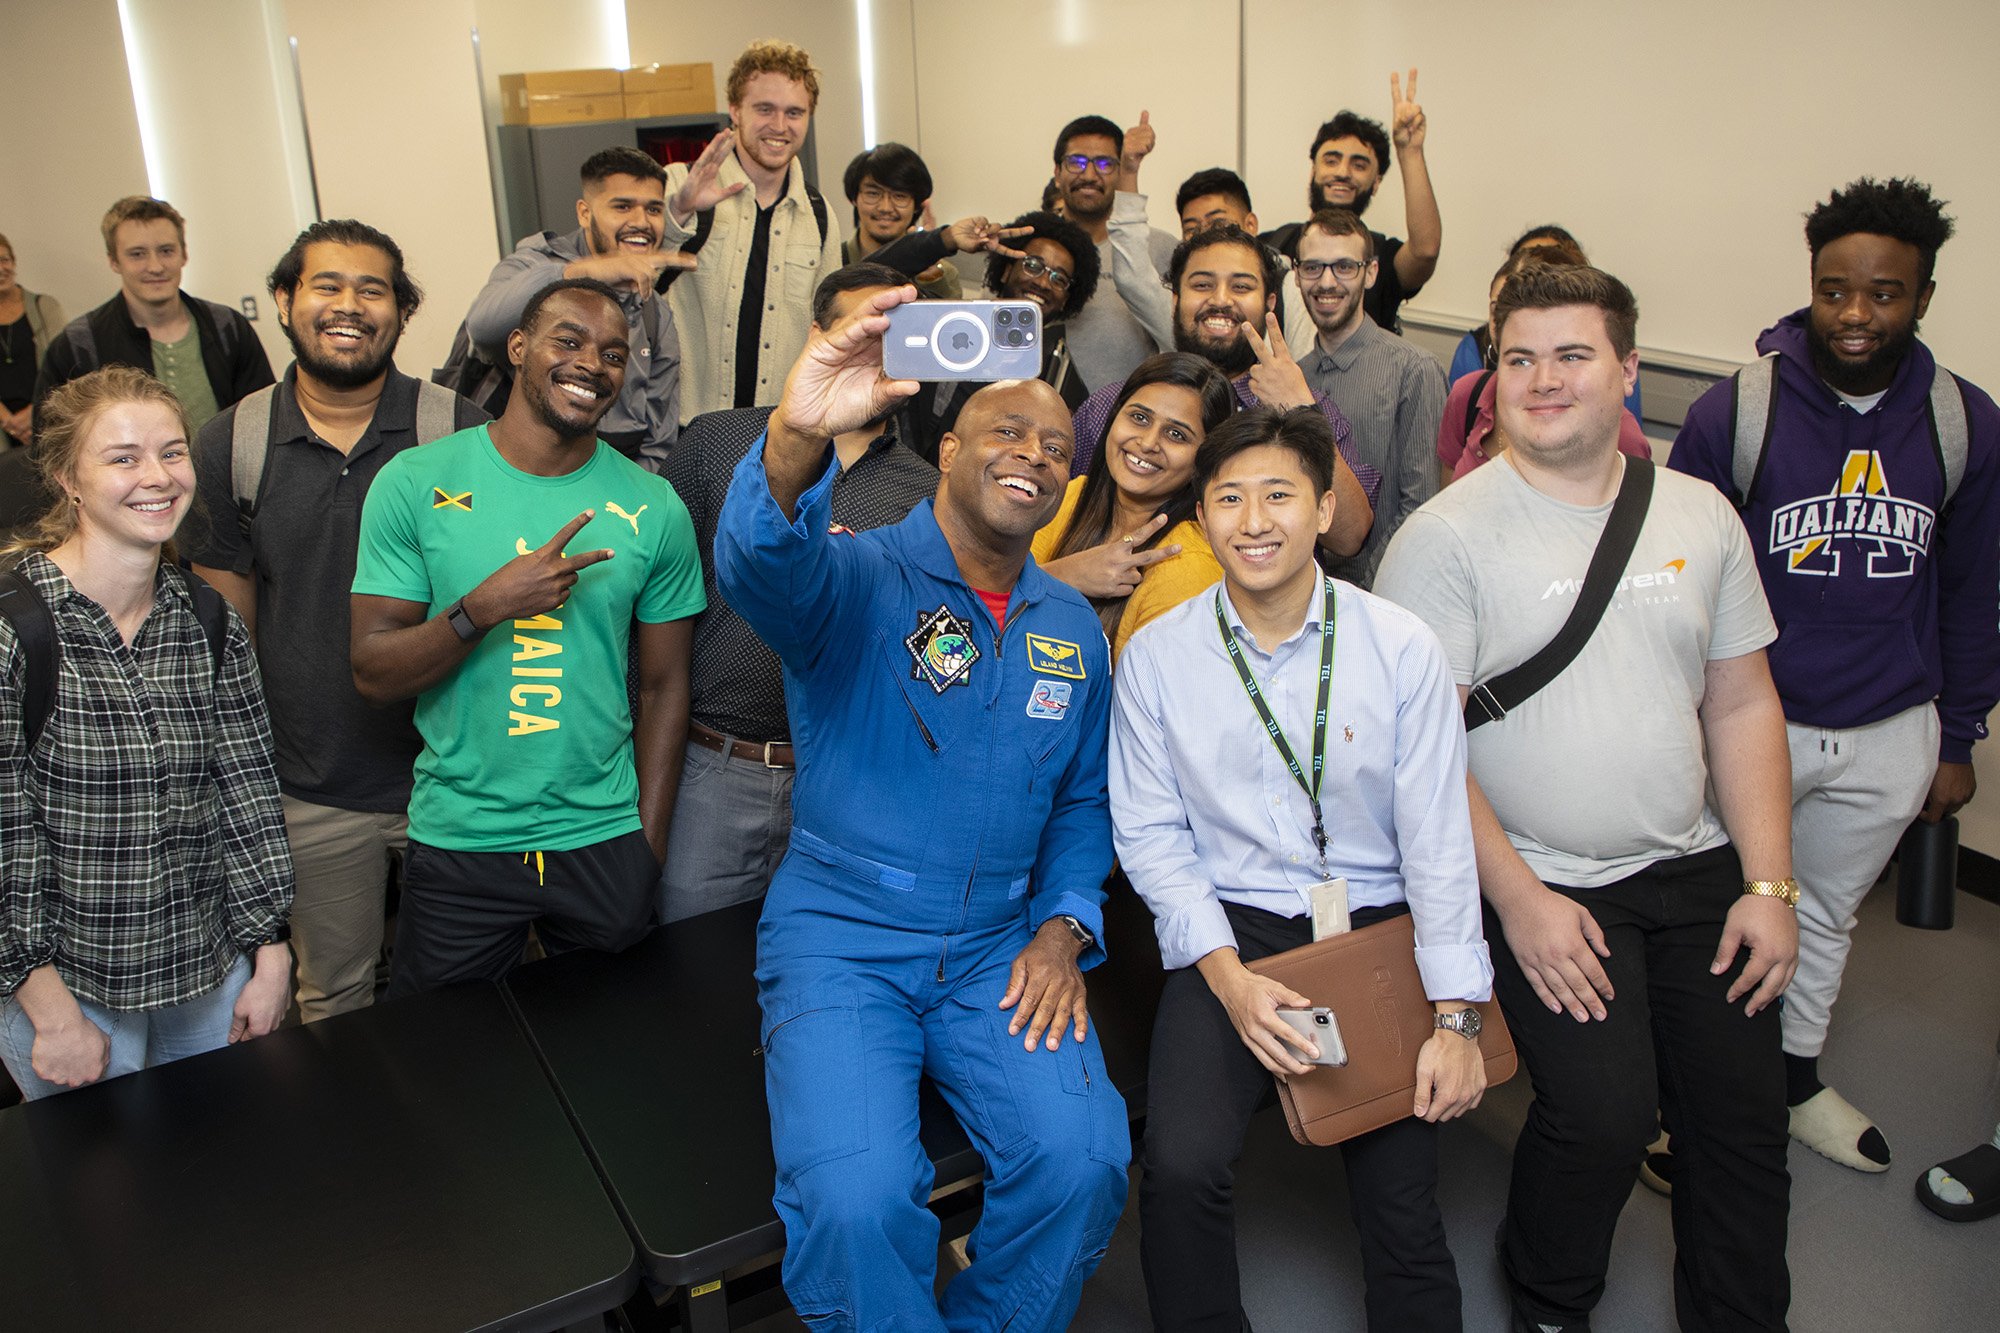 Former NASA Astronaut Leland Melvin takes a photo with students at the College of Nanotechnology, Science, and Engineering.